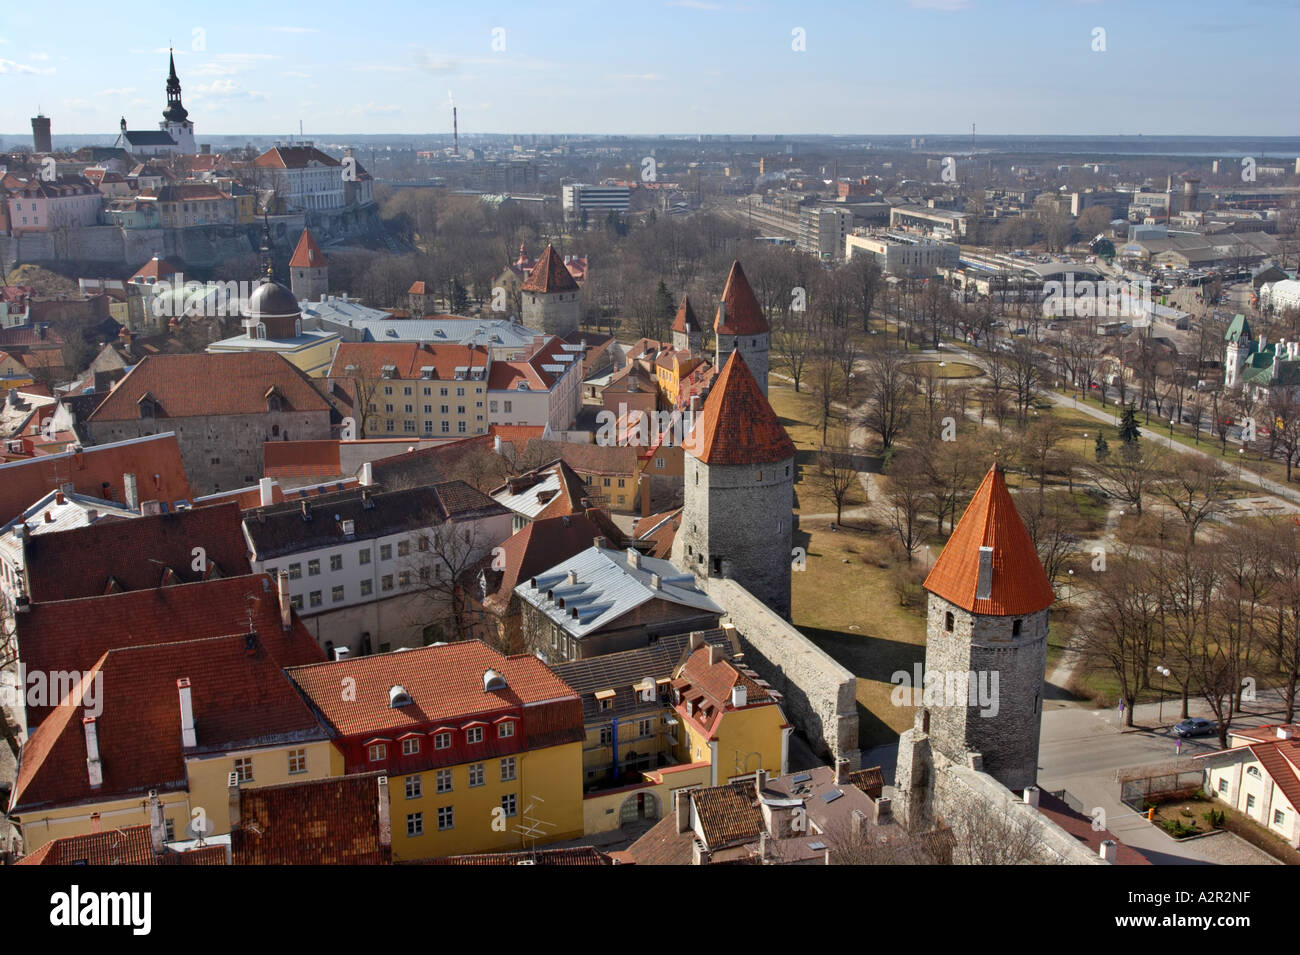 Old Town wall seen from the St. Olaf's church tower, Tallinn, Estonia Stock Photo